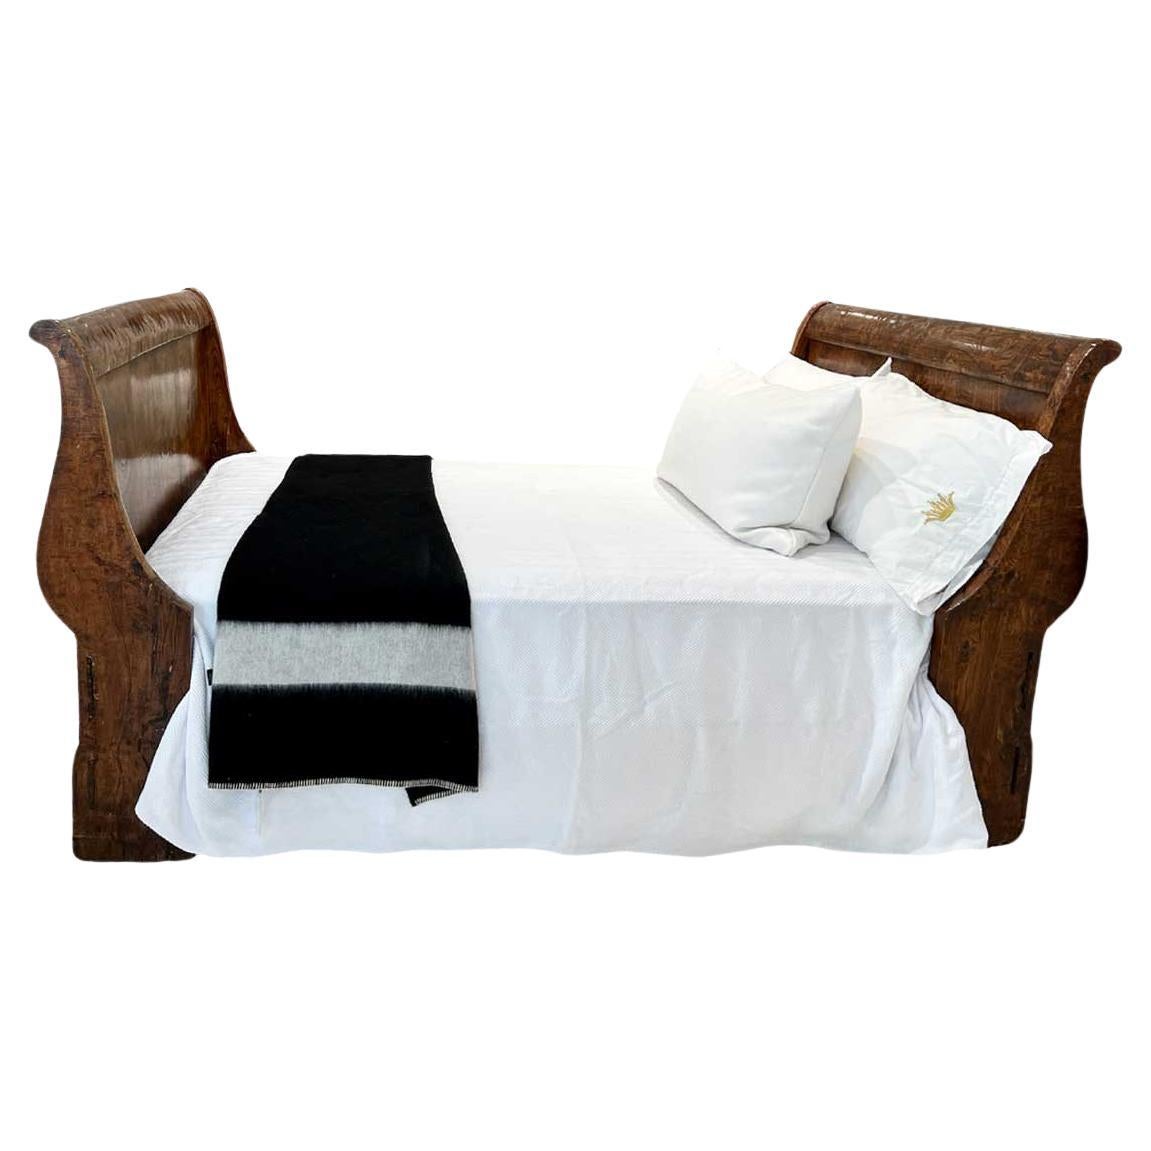 Wood Sleigh Bed